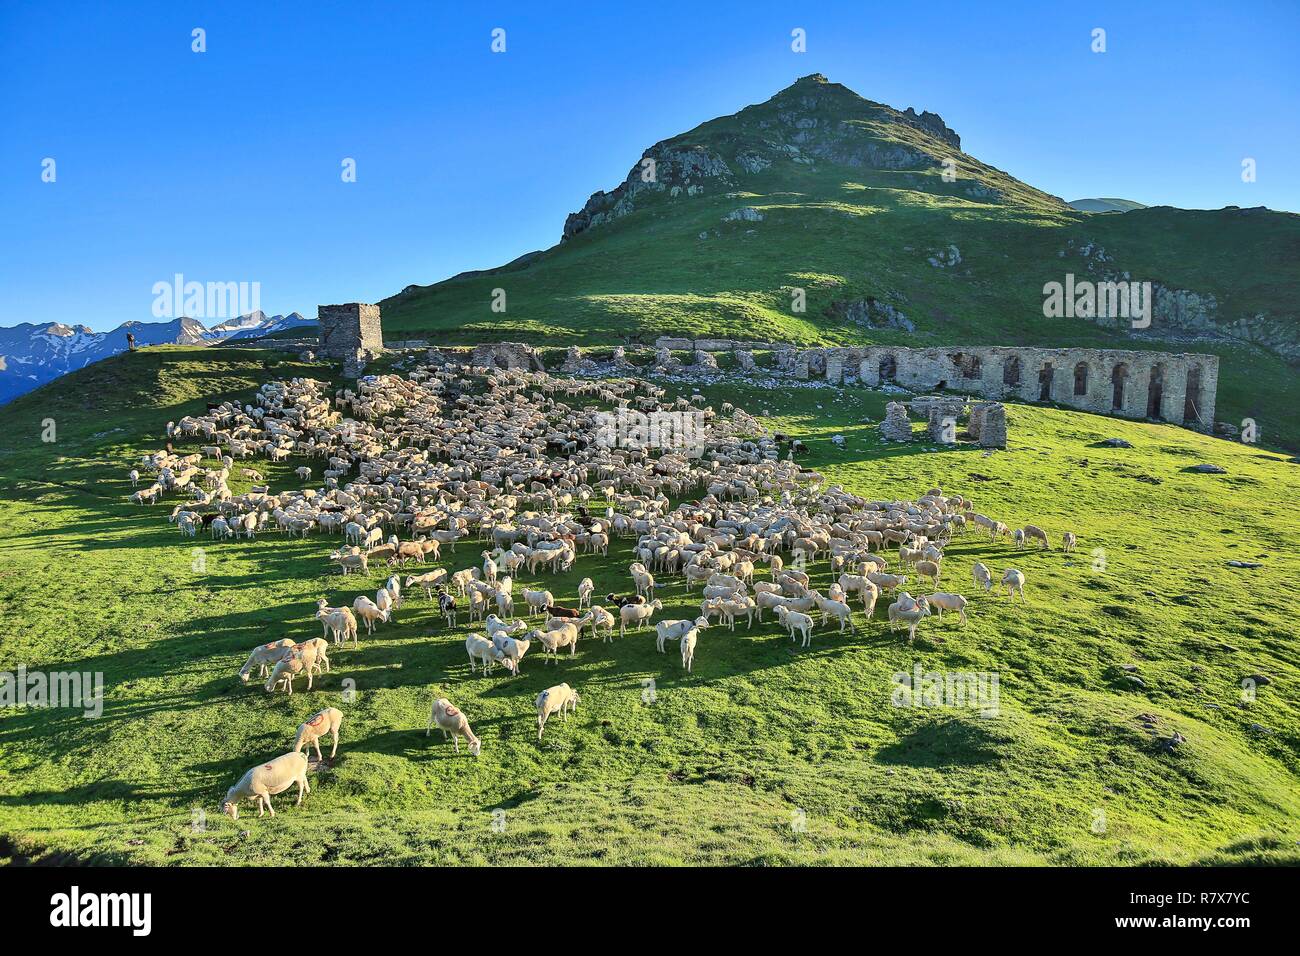 France, Ariege, Flock of sheep grazing near the ruined building at the port of Salau (2,087 m) is a border crossing of the Pyrenees between France and Spain Stock Photo